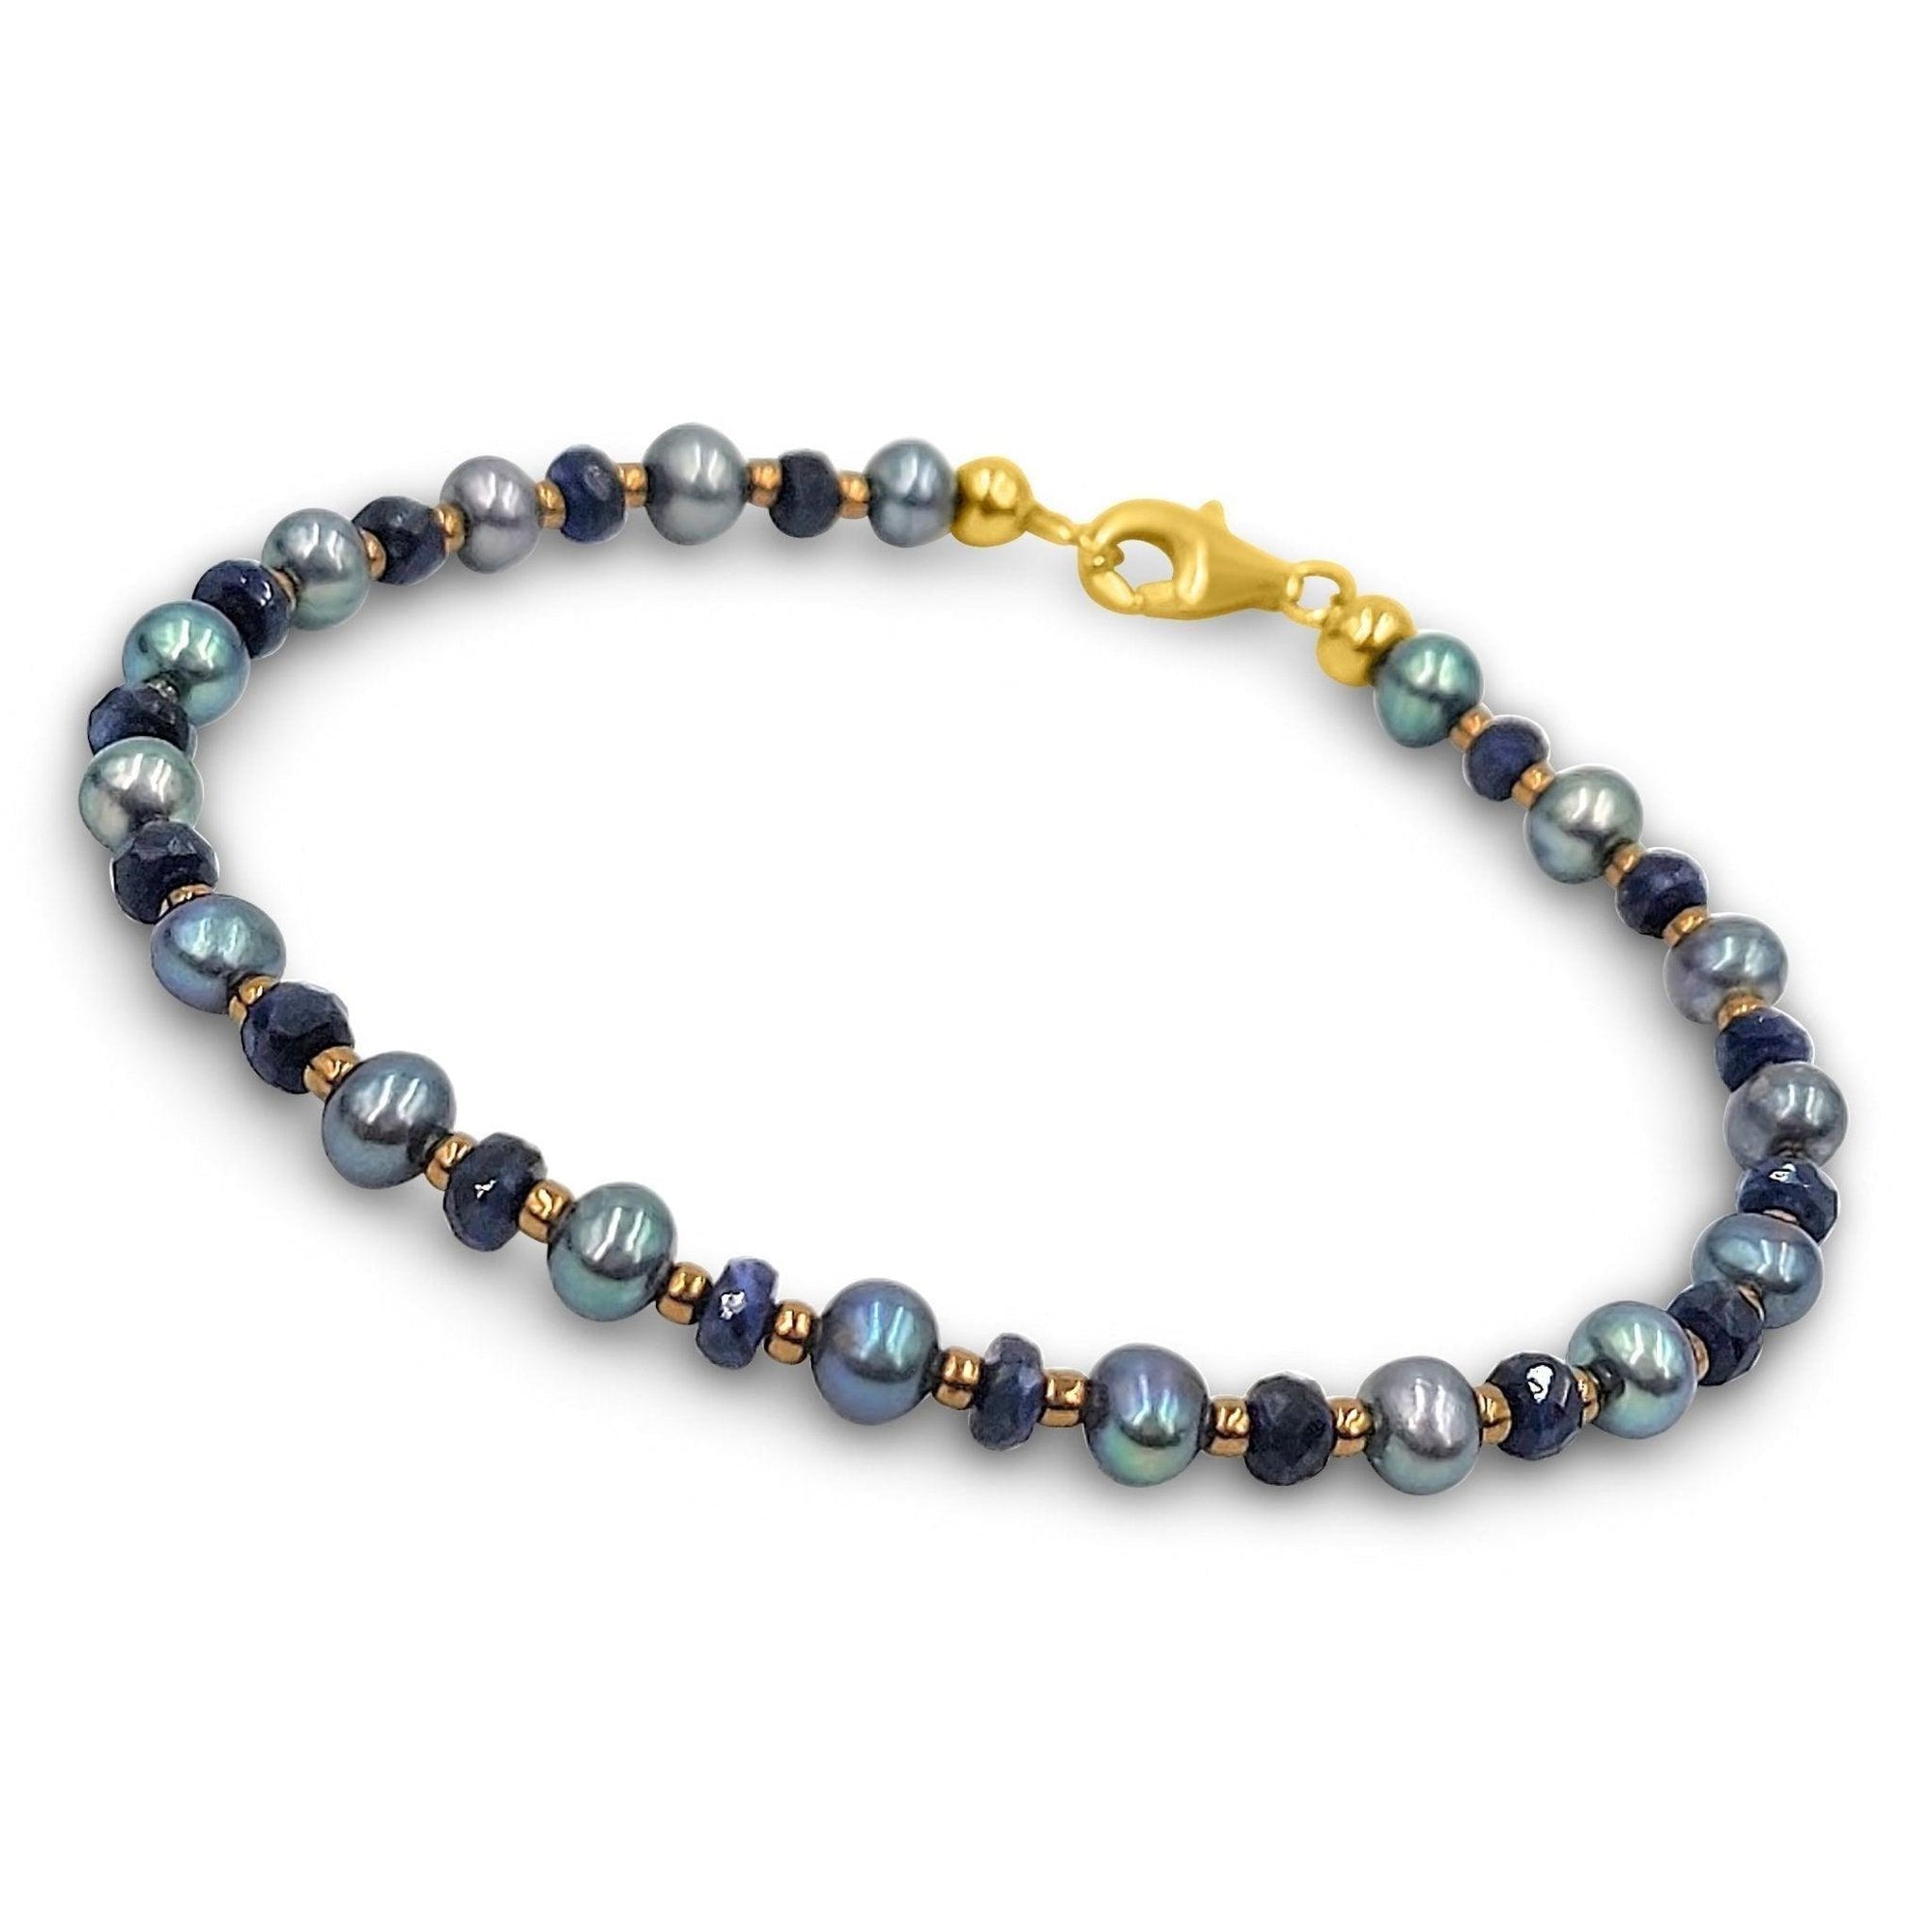 Real Sapphire and Pearl Bracelet - Uniquelan Jewelry